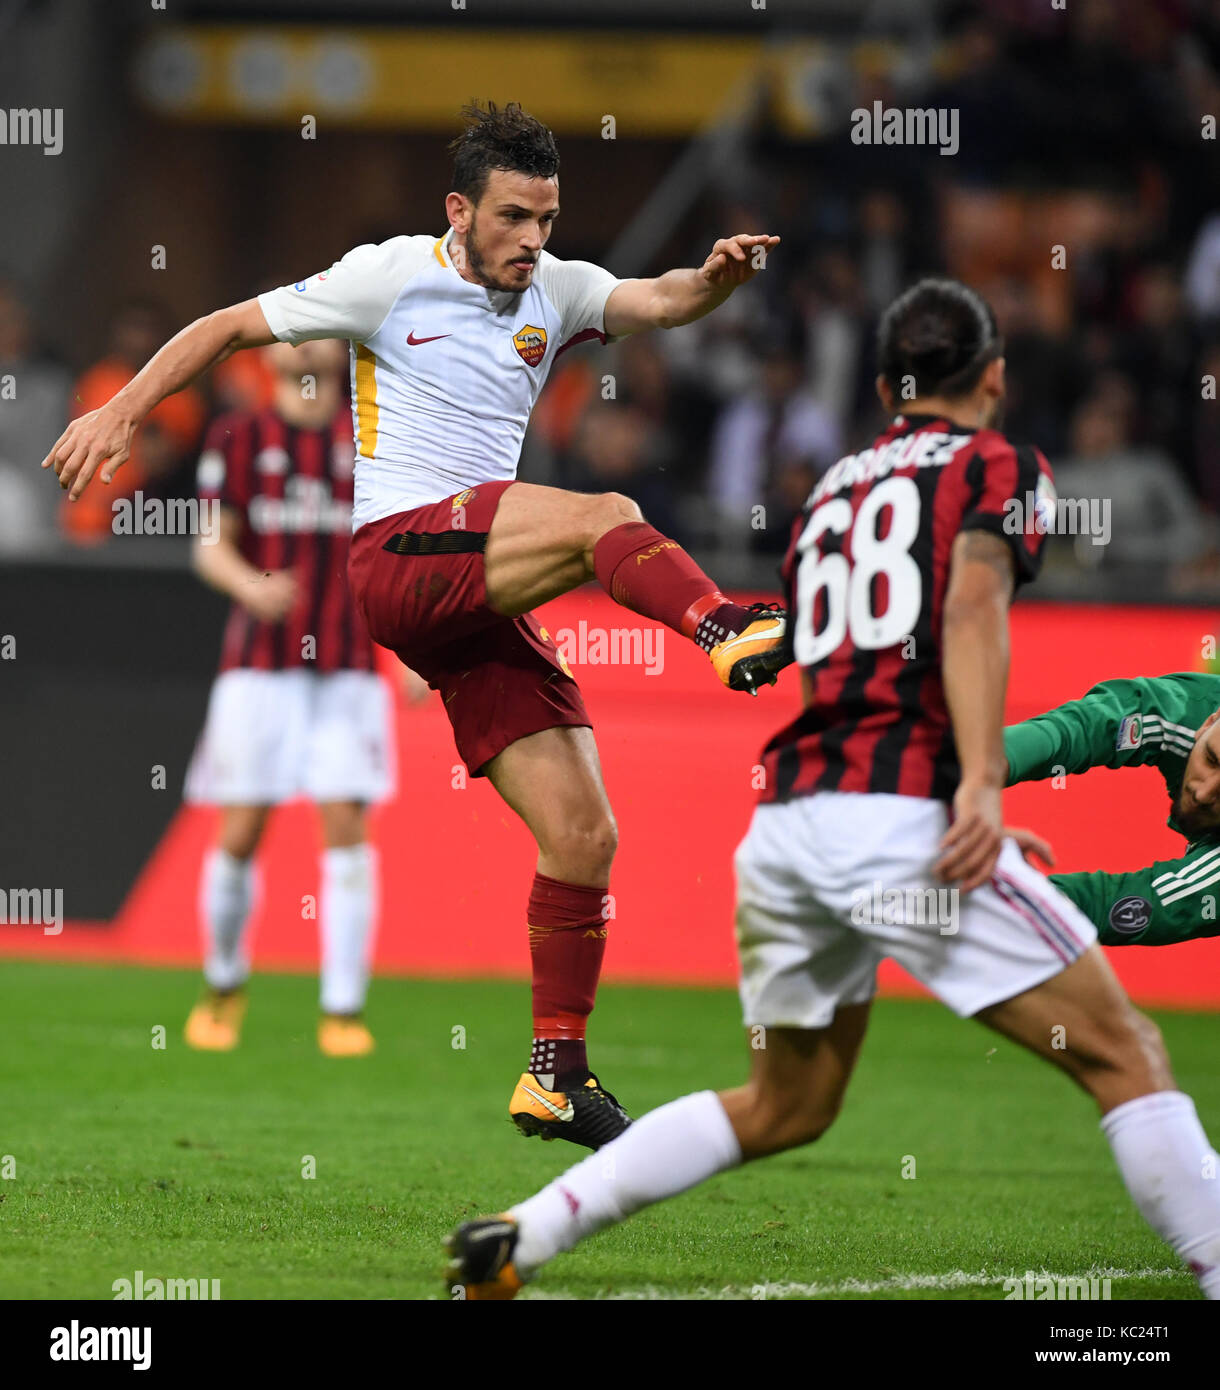 Rome. 2nd Oct, 2017. Roma's Alessandro Florenzi (L) scores during a Serie A soccer match between AC Milan and Roma in Milan, Italy, Otc. 1, 2017. Roma won 2-0. Credit: Alberto Lingria/Xinhua/Alamy Live News Stock Photo